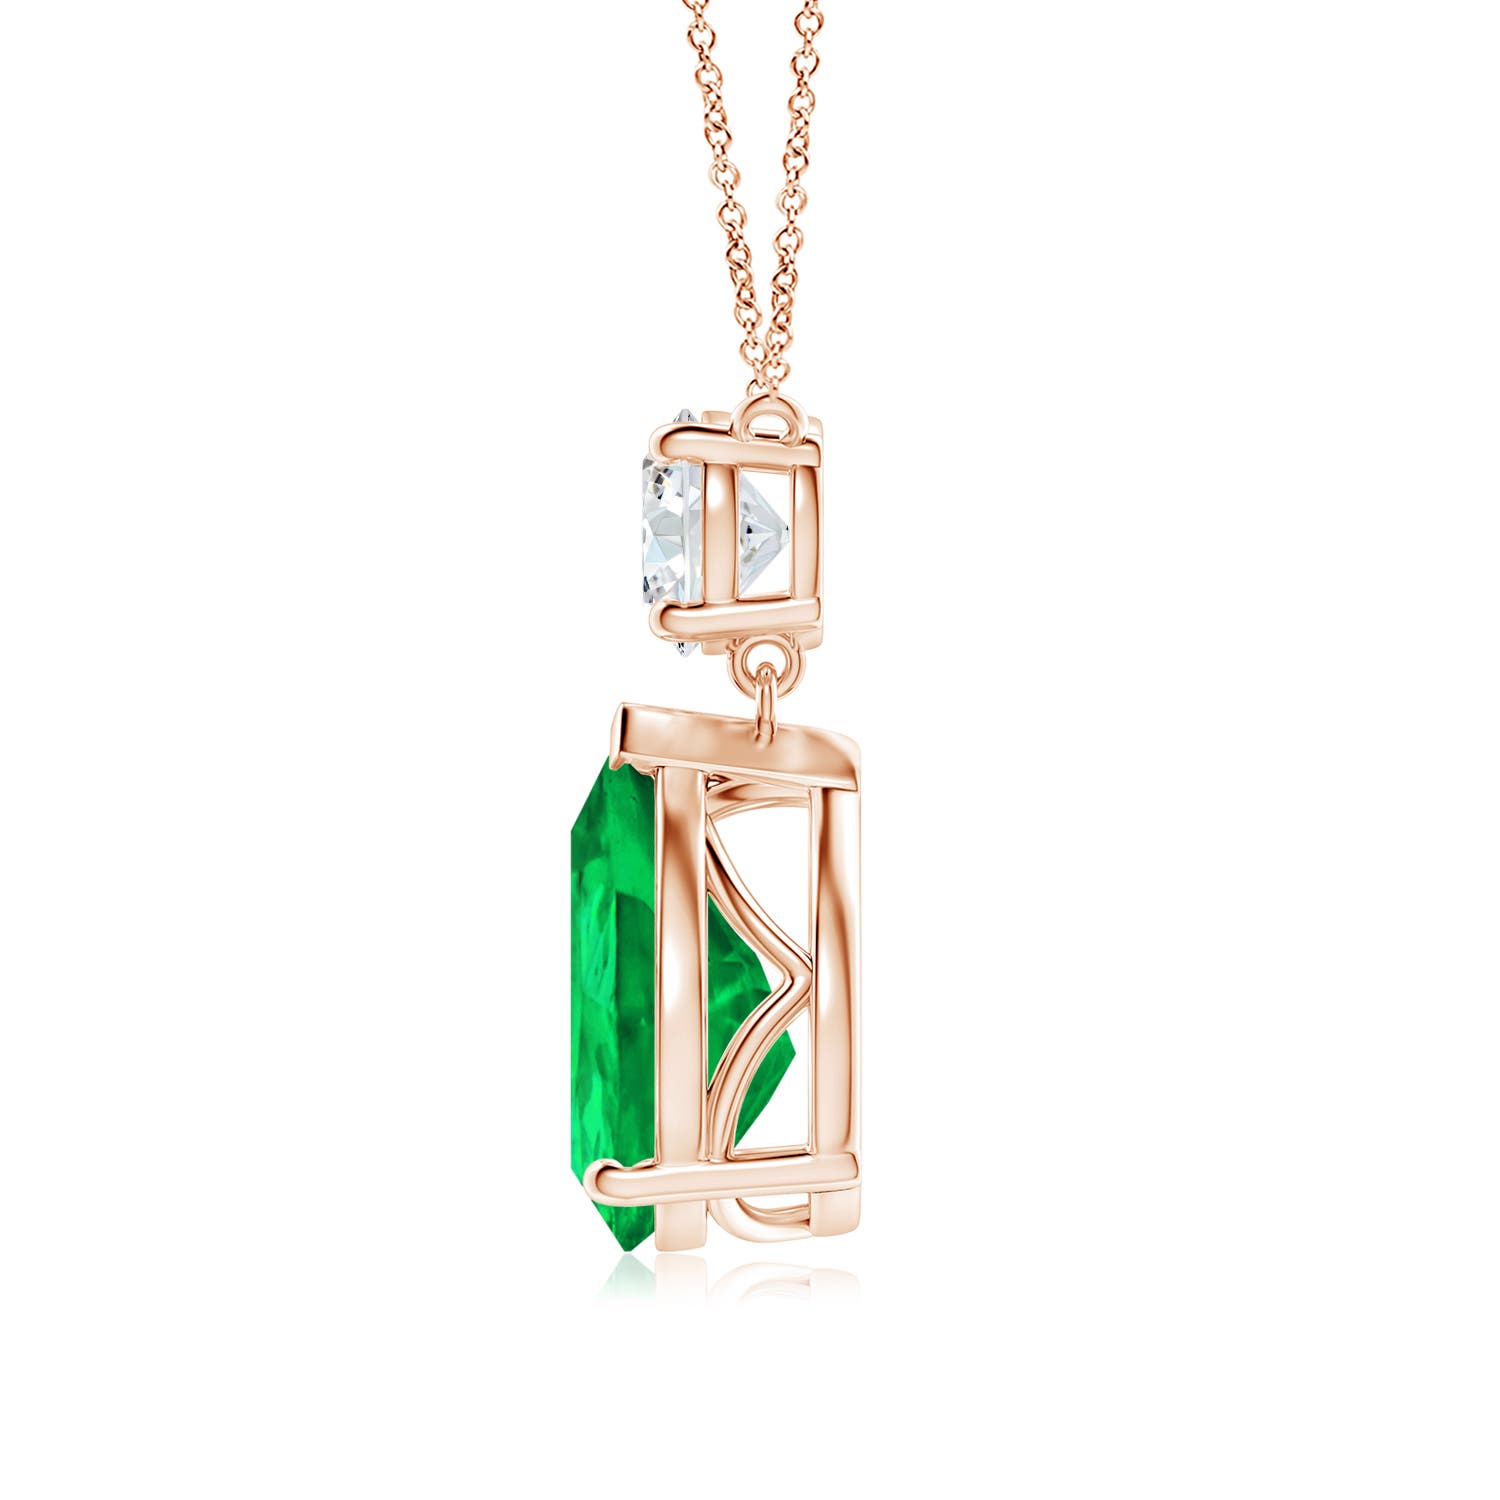 AAA - Emerald / 5.21 CT / 14 KT Rose Gold